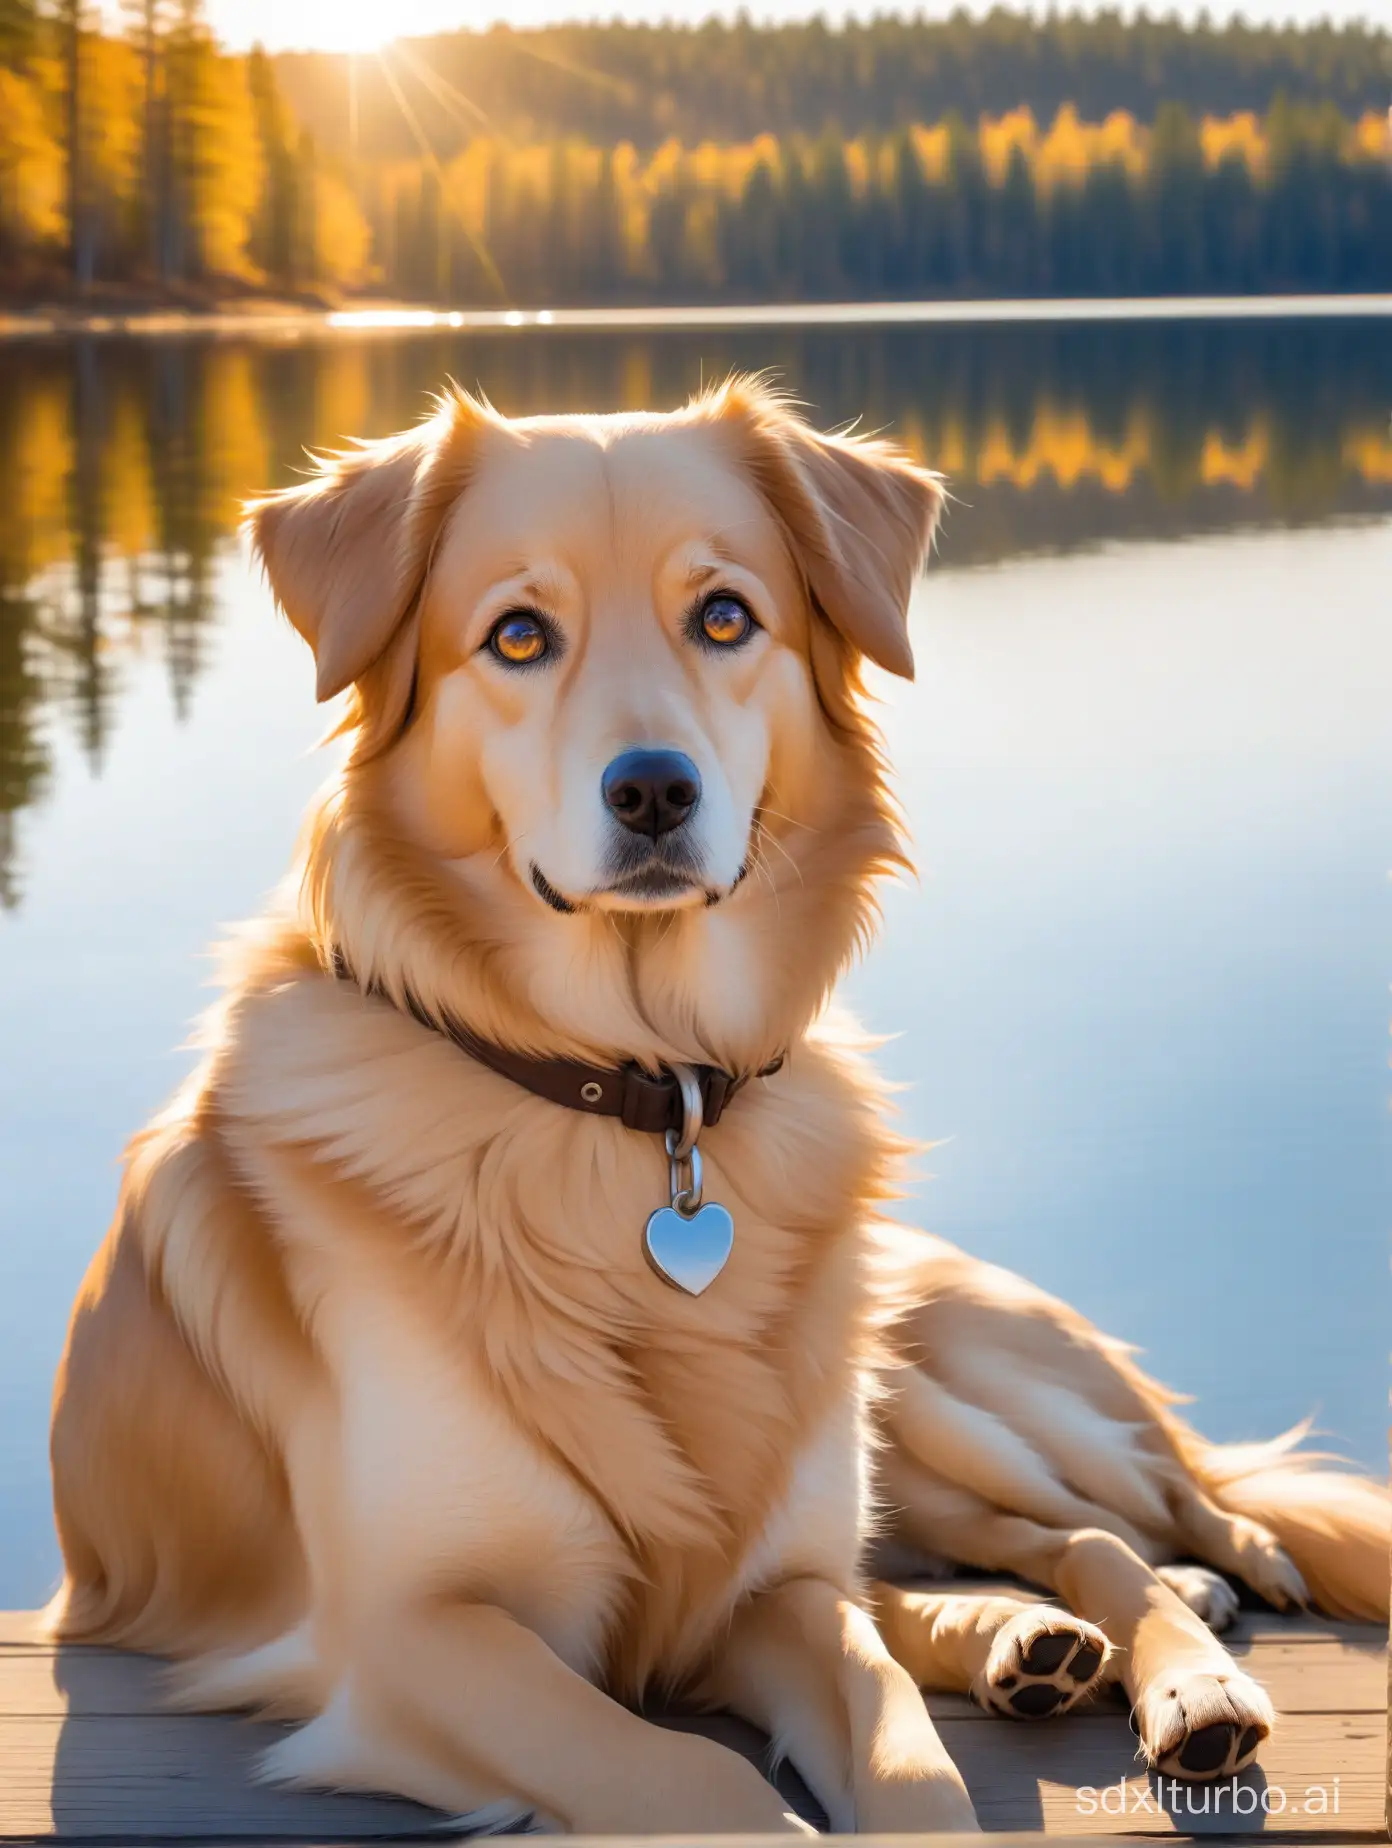 A golden-haired rescue dog sits by the lake, its eyes loyal and warm, waiting for its owner to return. Its fur shines with golden light in the sunlight, with a calm lake and distant forest in the background.